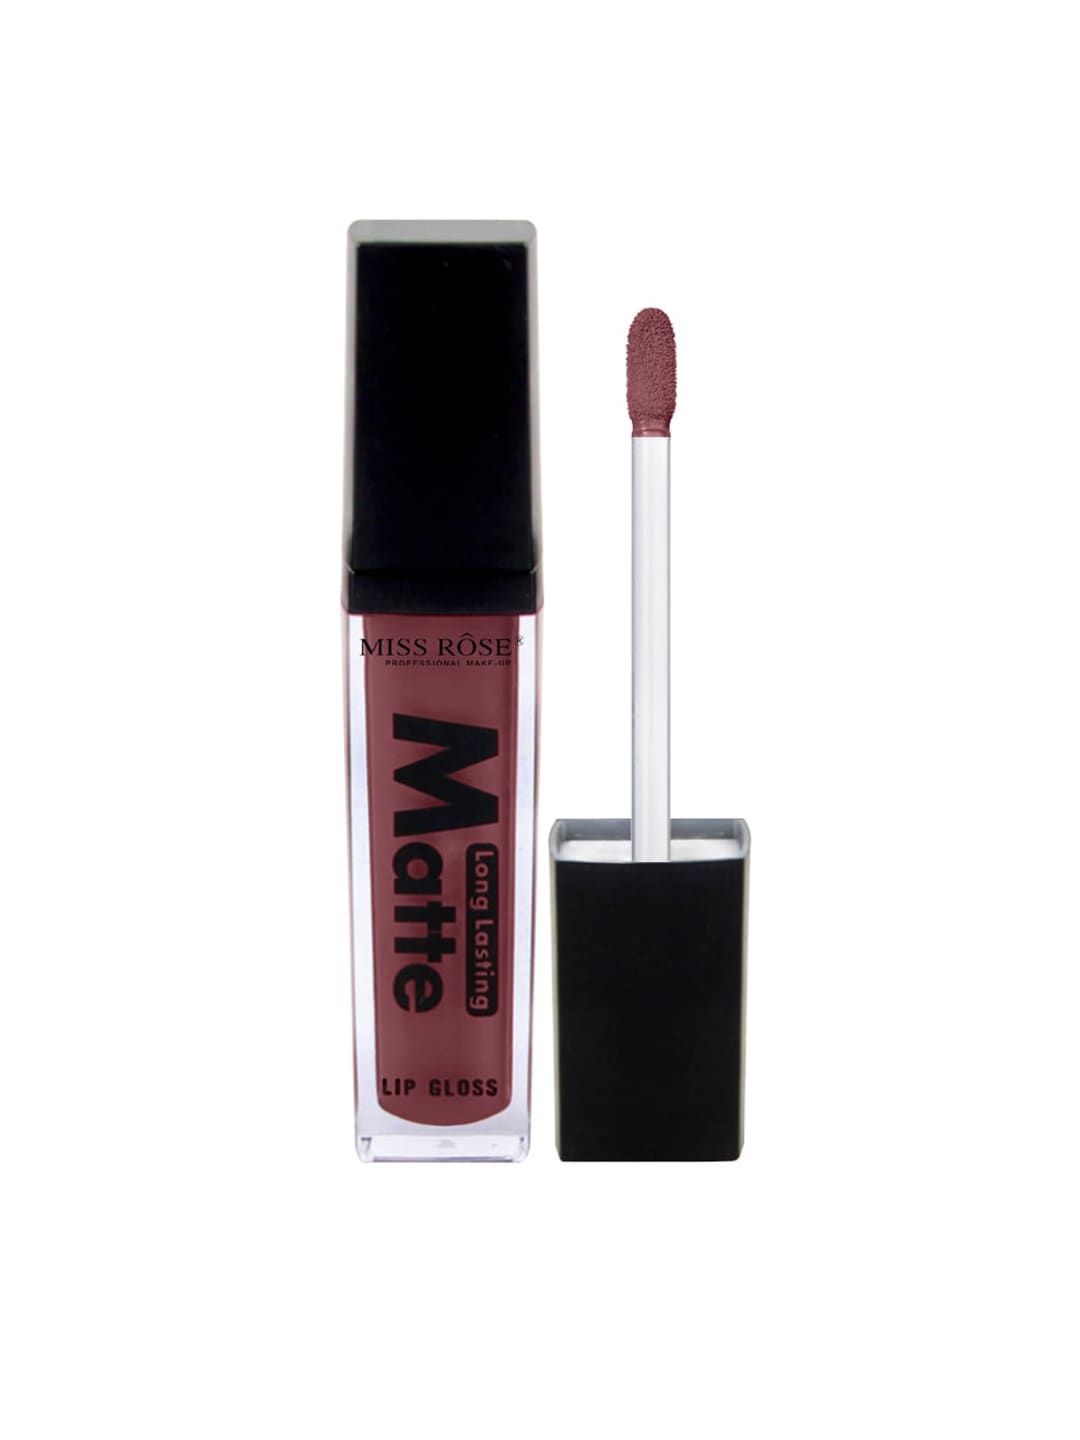 MISS ROSE Matte Long Lasting LipGloss 7701-002M 22 20 gm Price in India